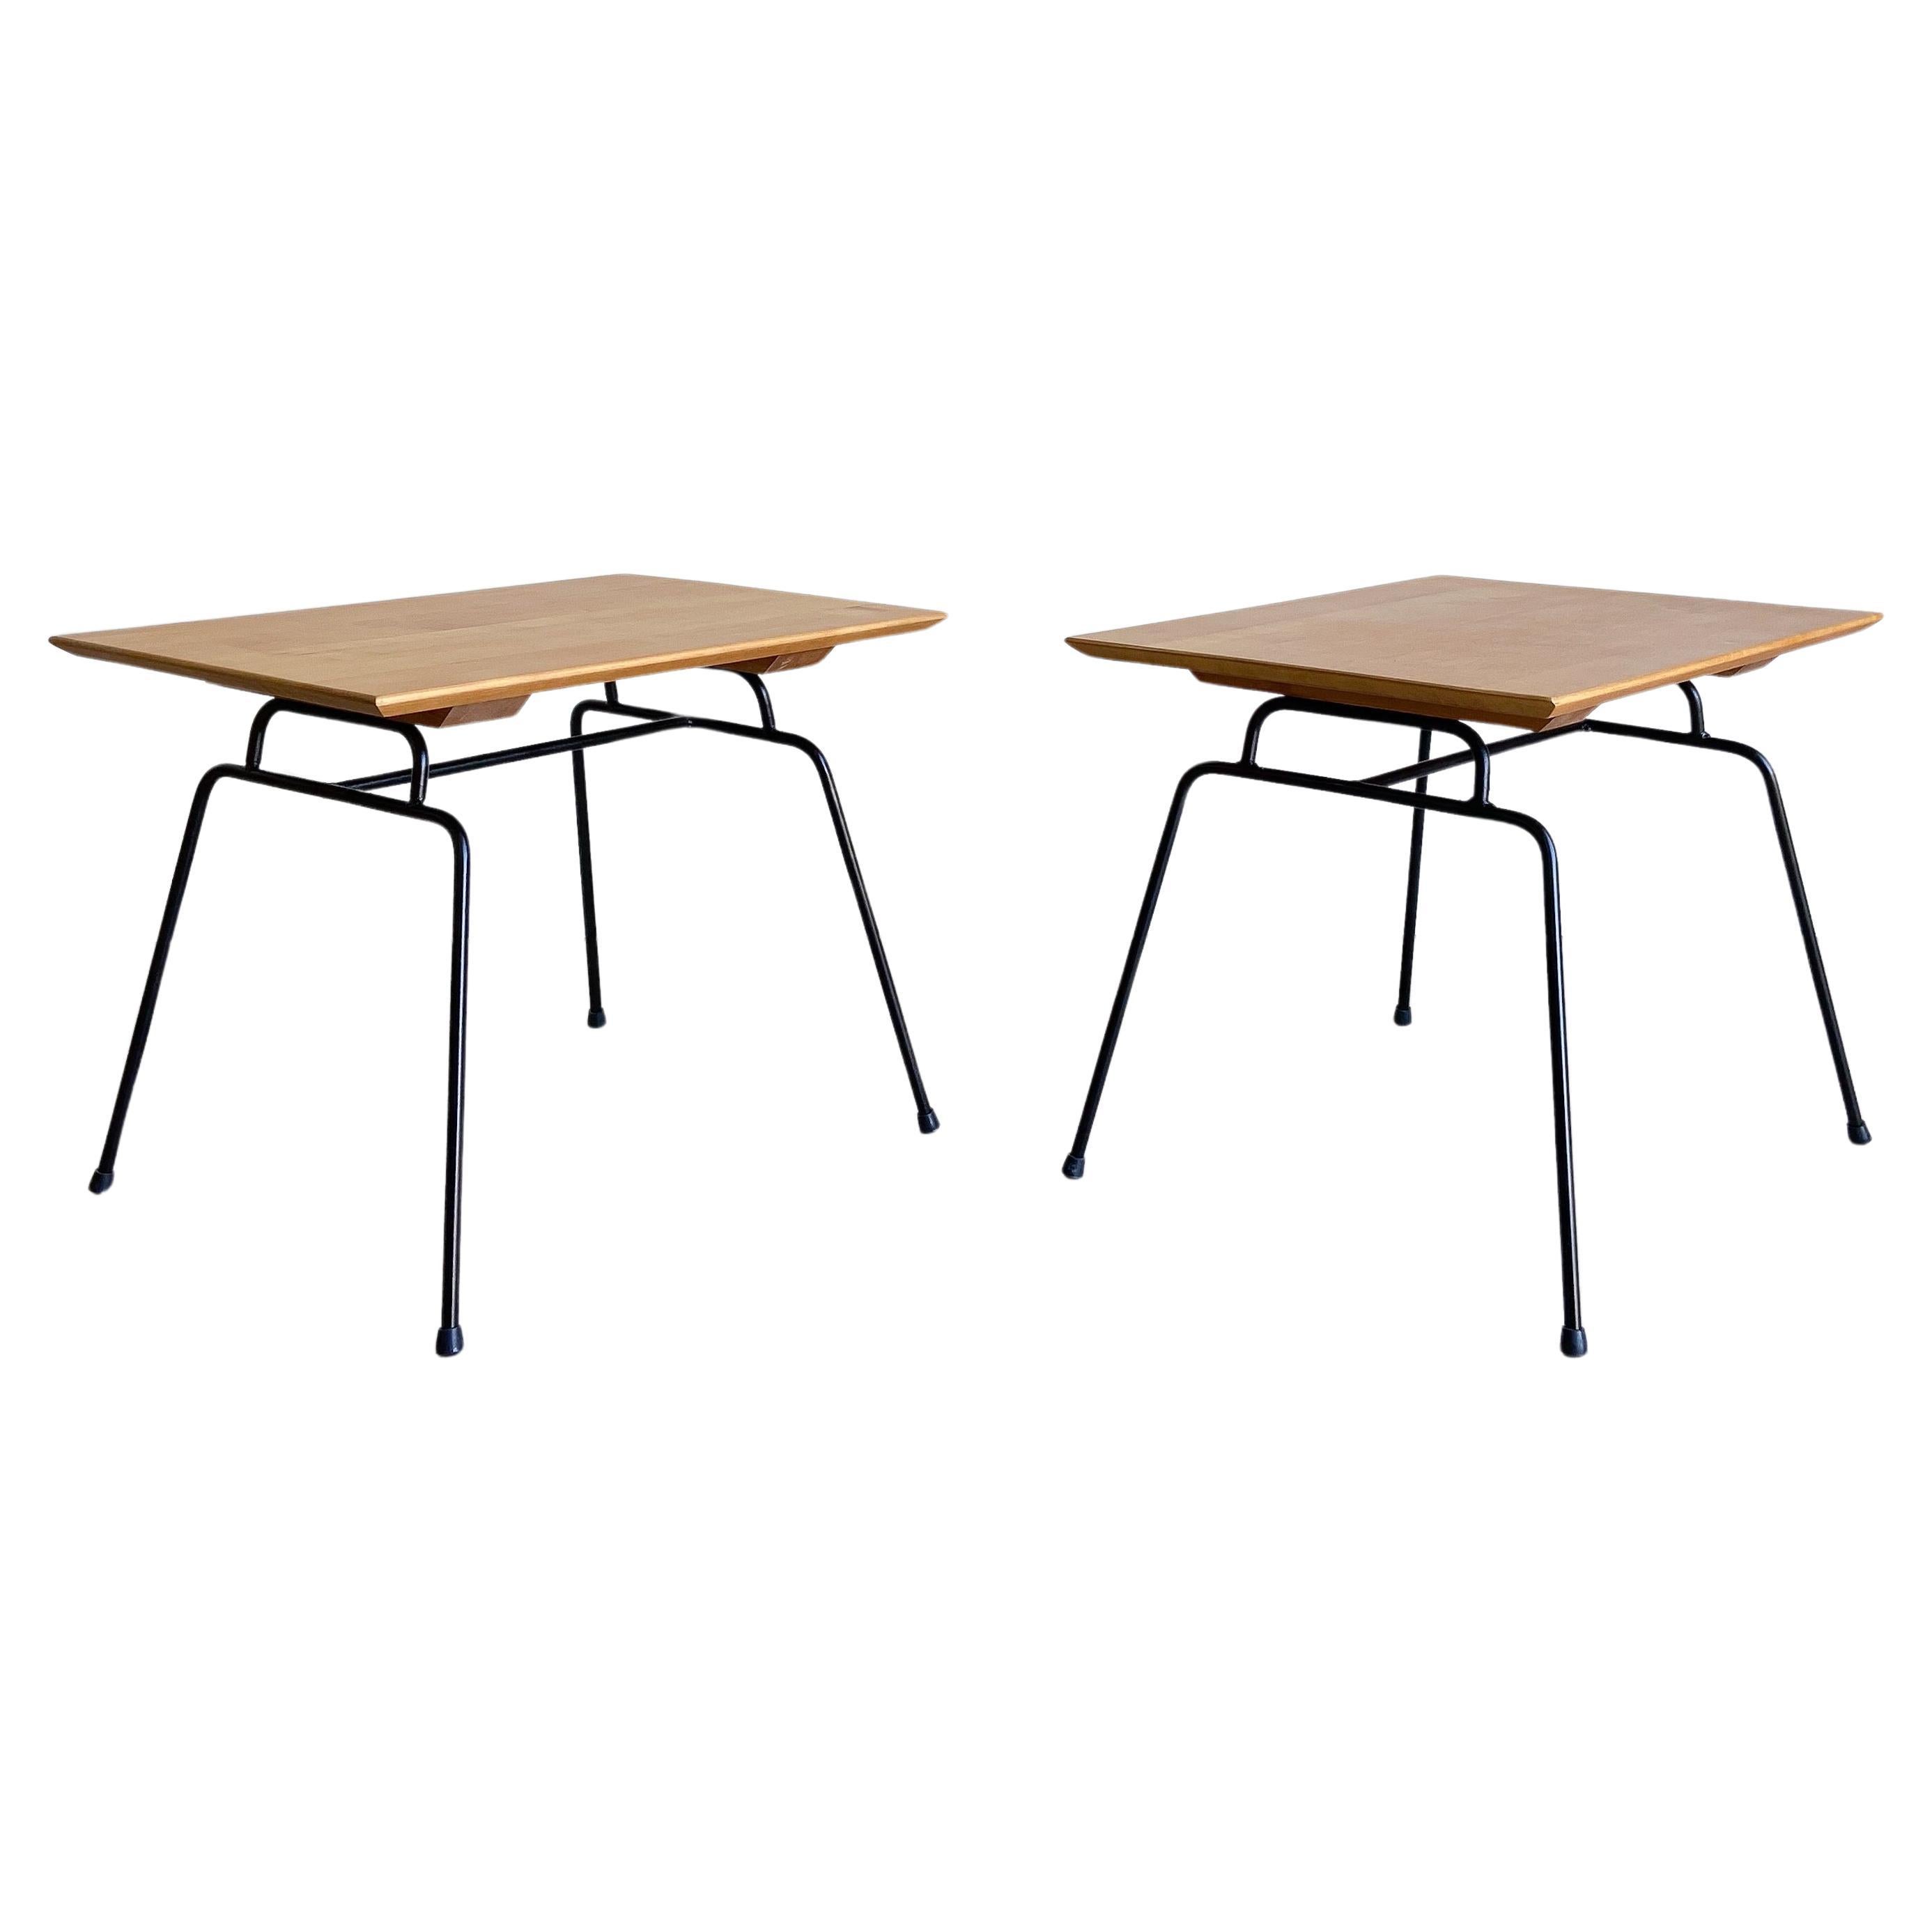 Paul McCobb Iron and Birch Tables, Planner Group, 1950's For Sale